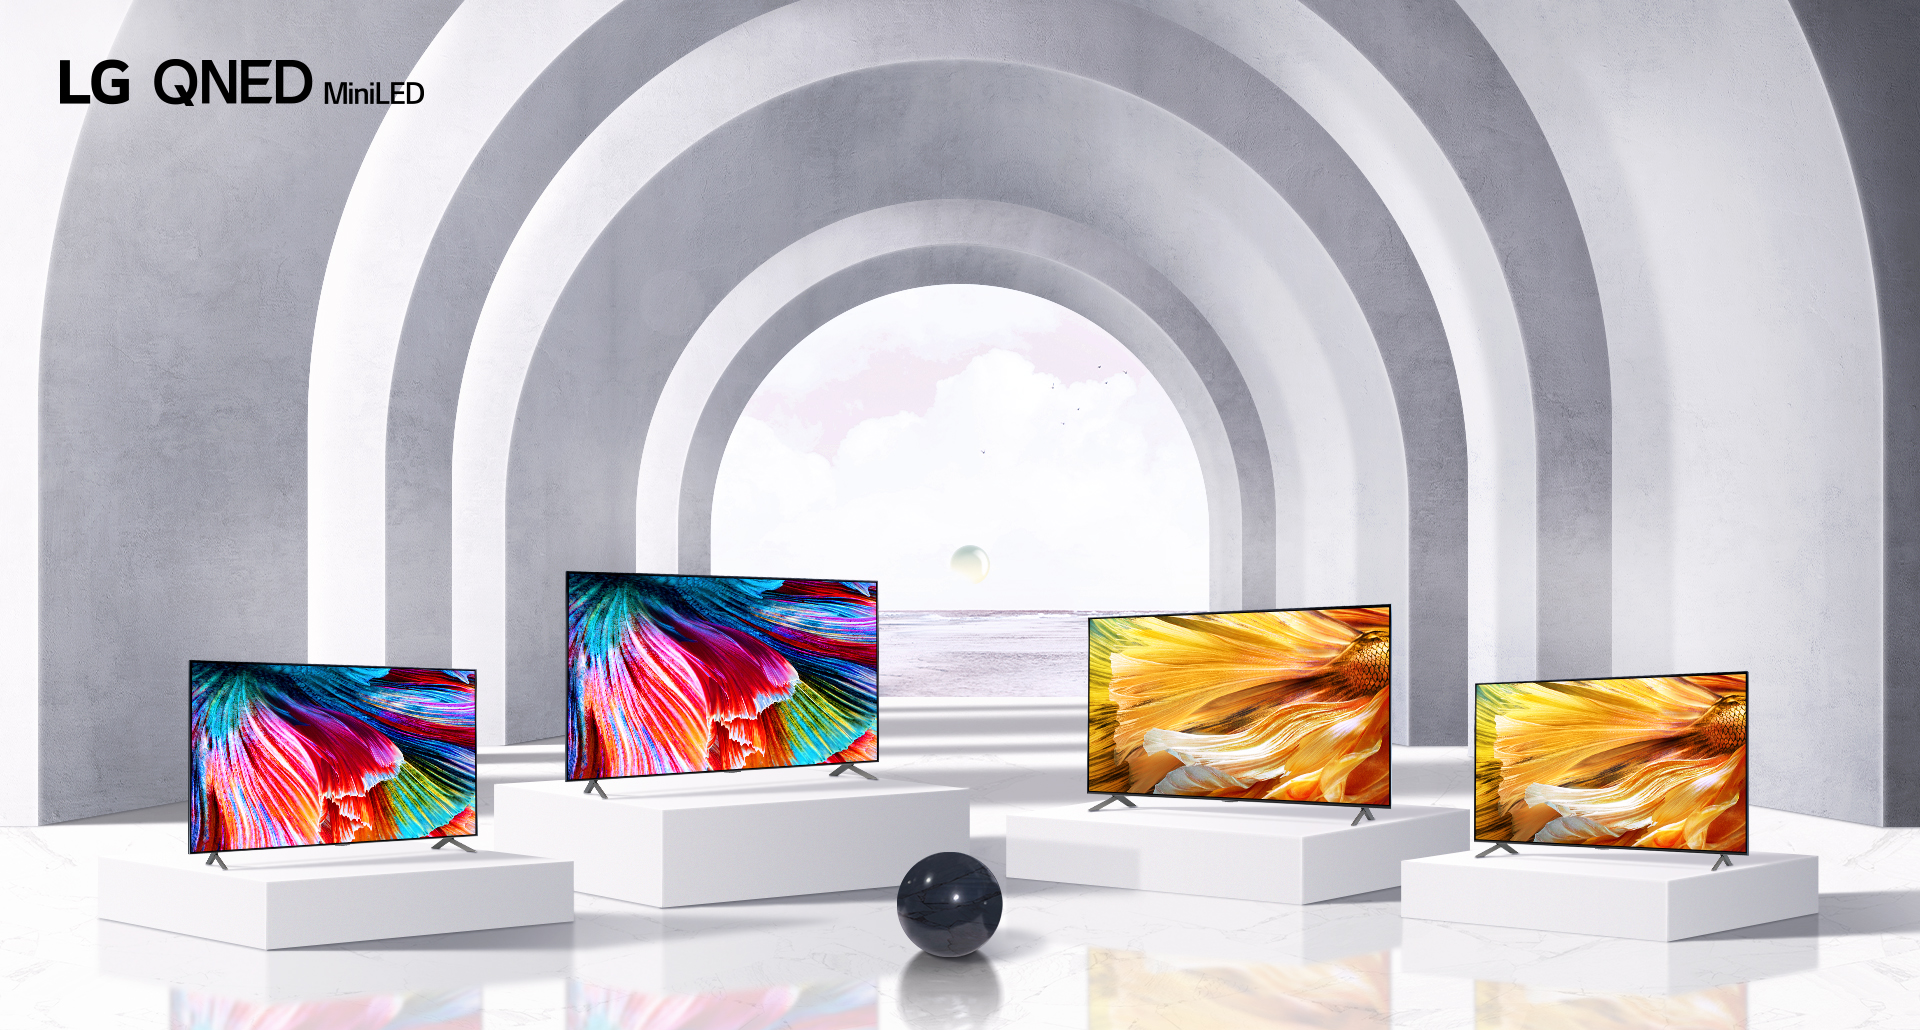 LG QNED Mini LED TV Lineup Spoilt For Choice! LG Saturates Smart TV Market Further With Massive Range Announced At CES 2021